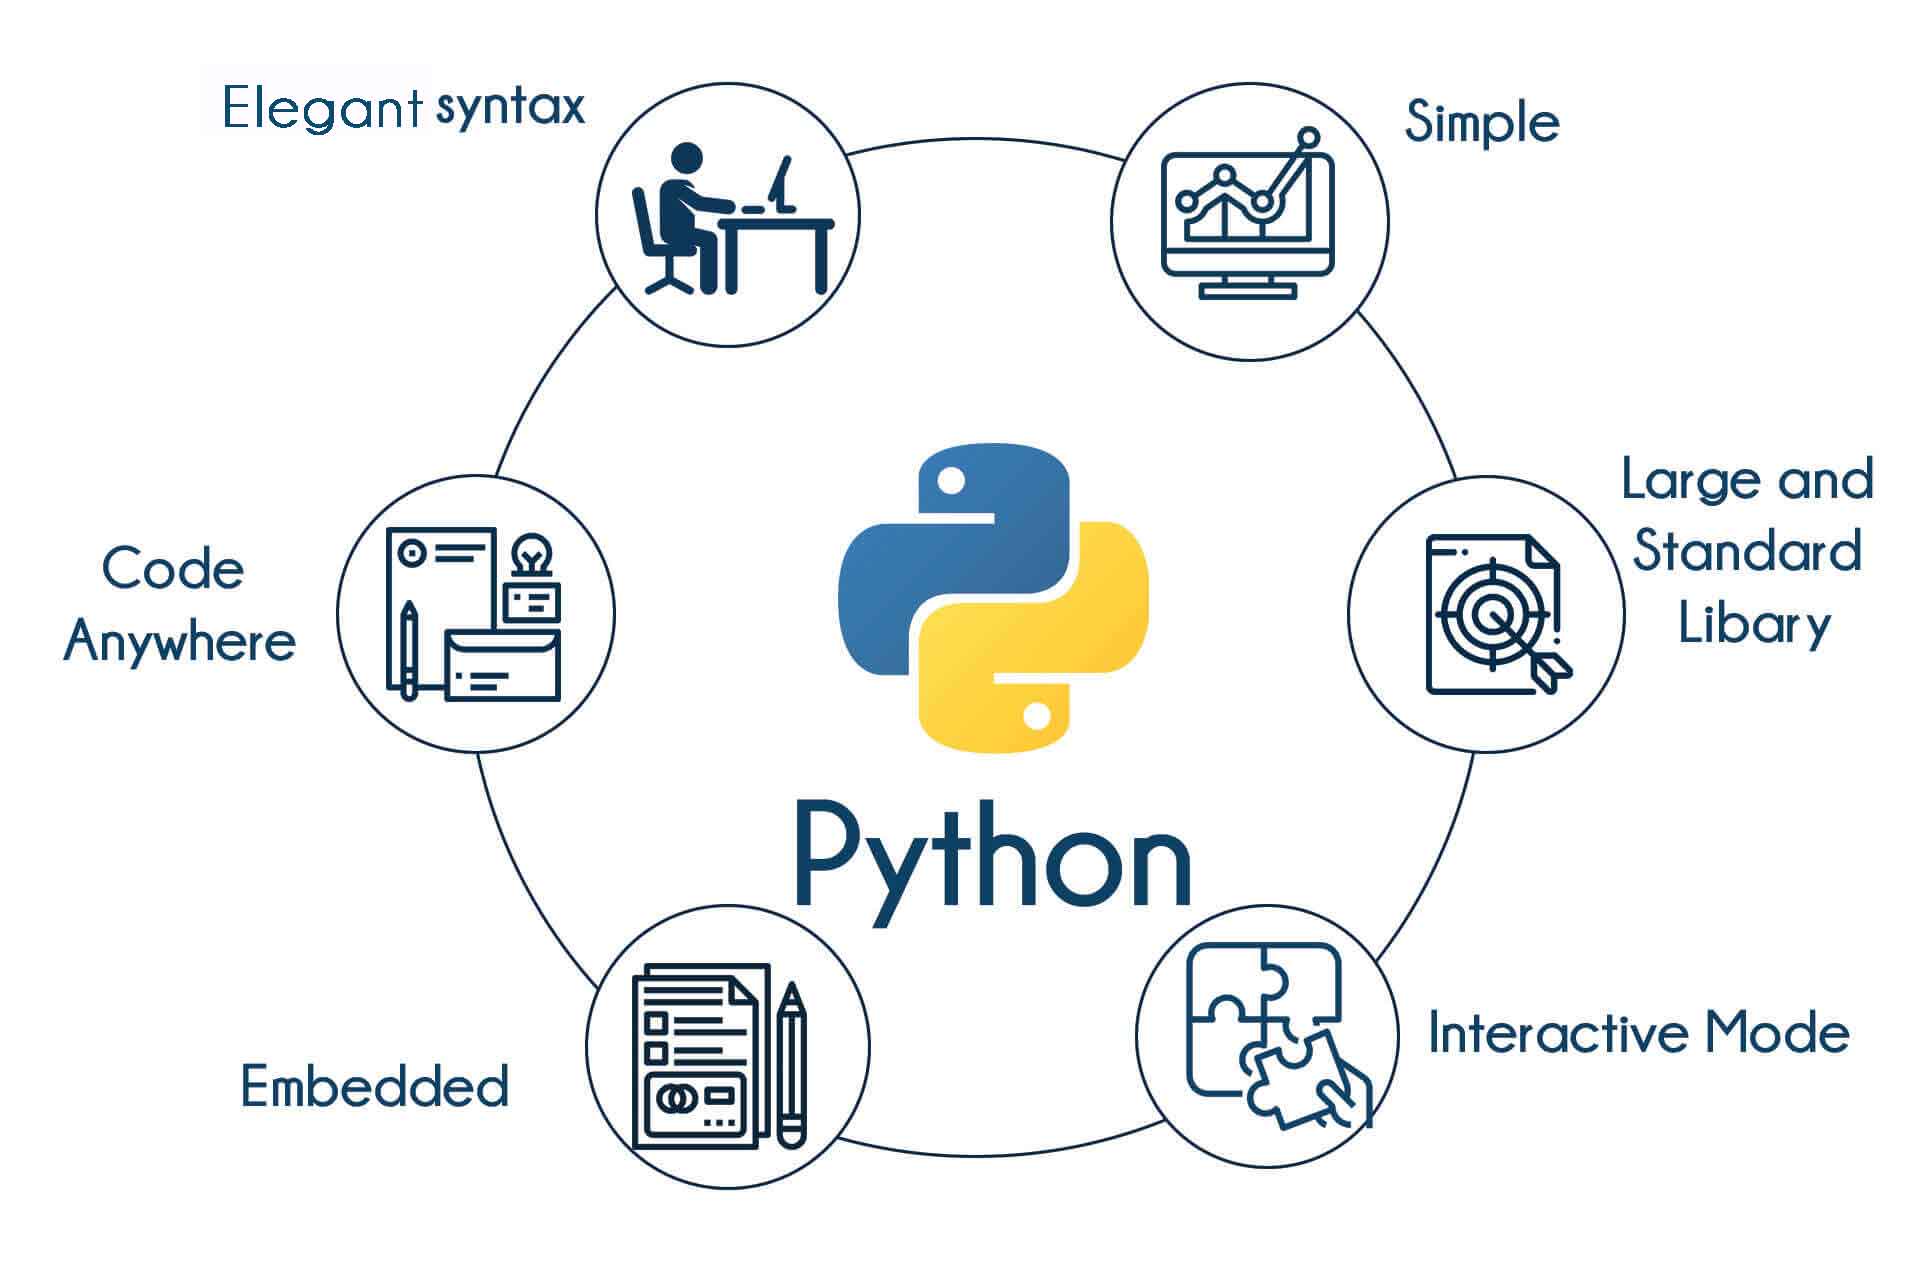 python features